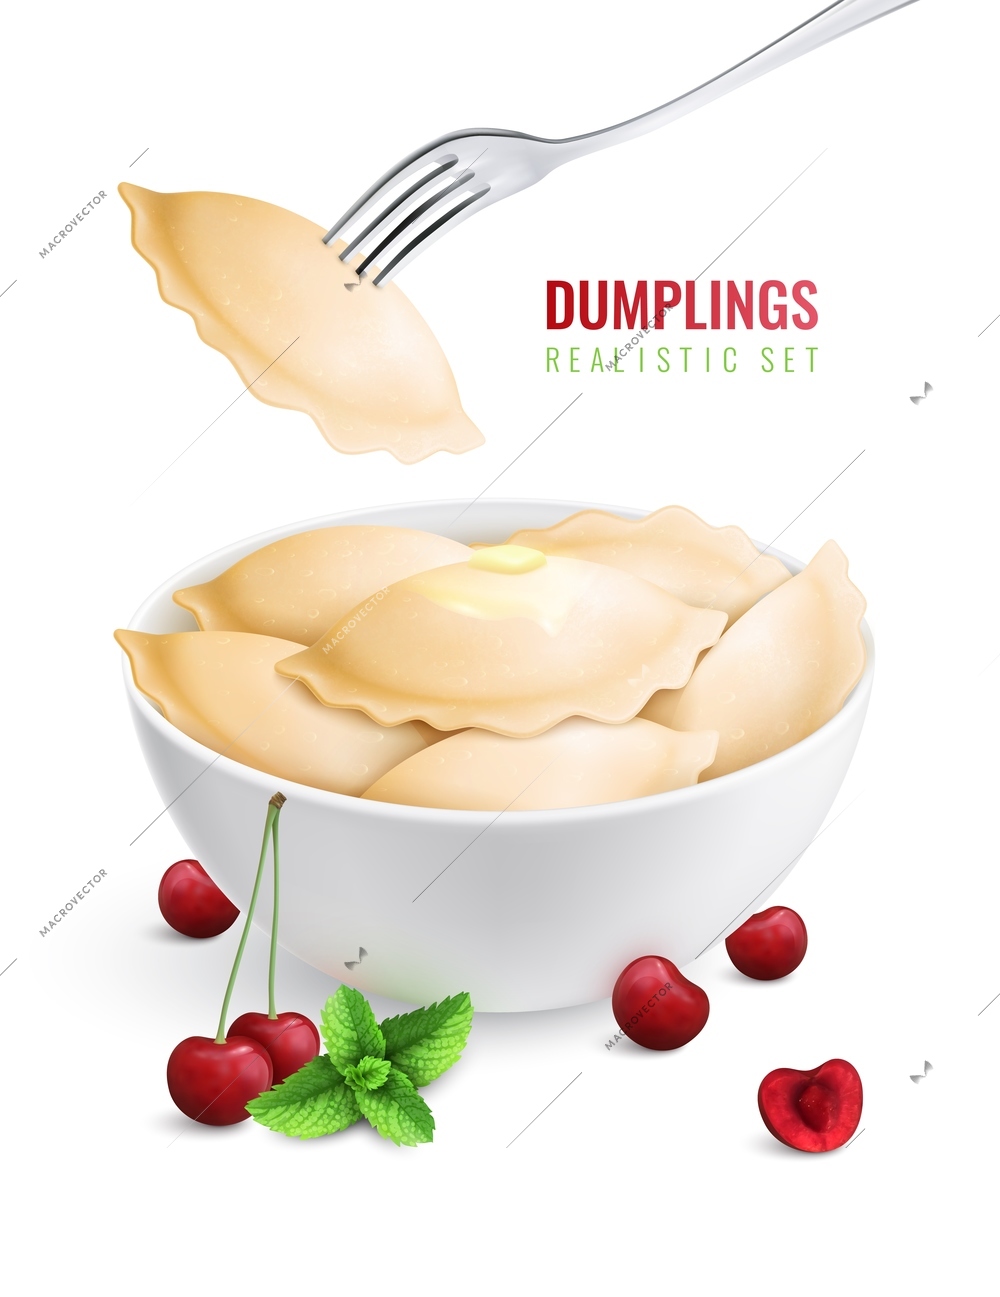 Dumplings ravioli manti colored realistic composition vareniki with cherry filling in a plate vector illustration